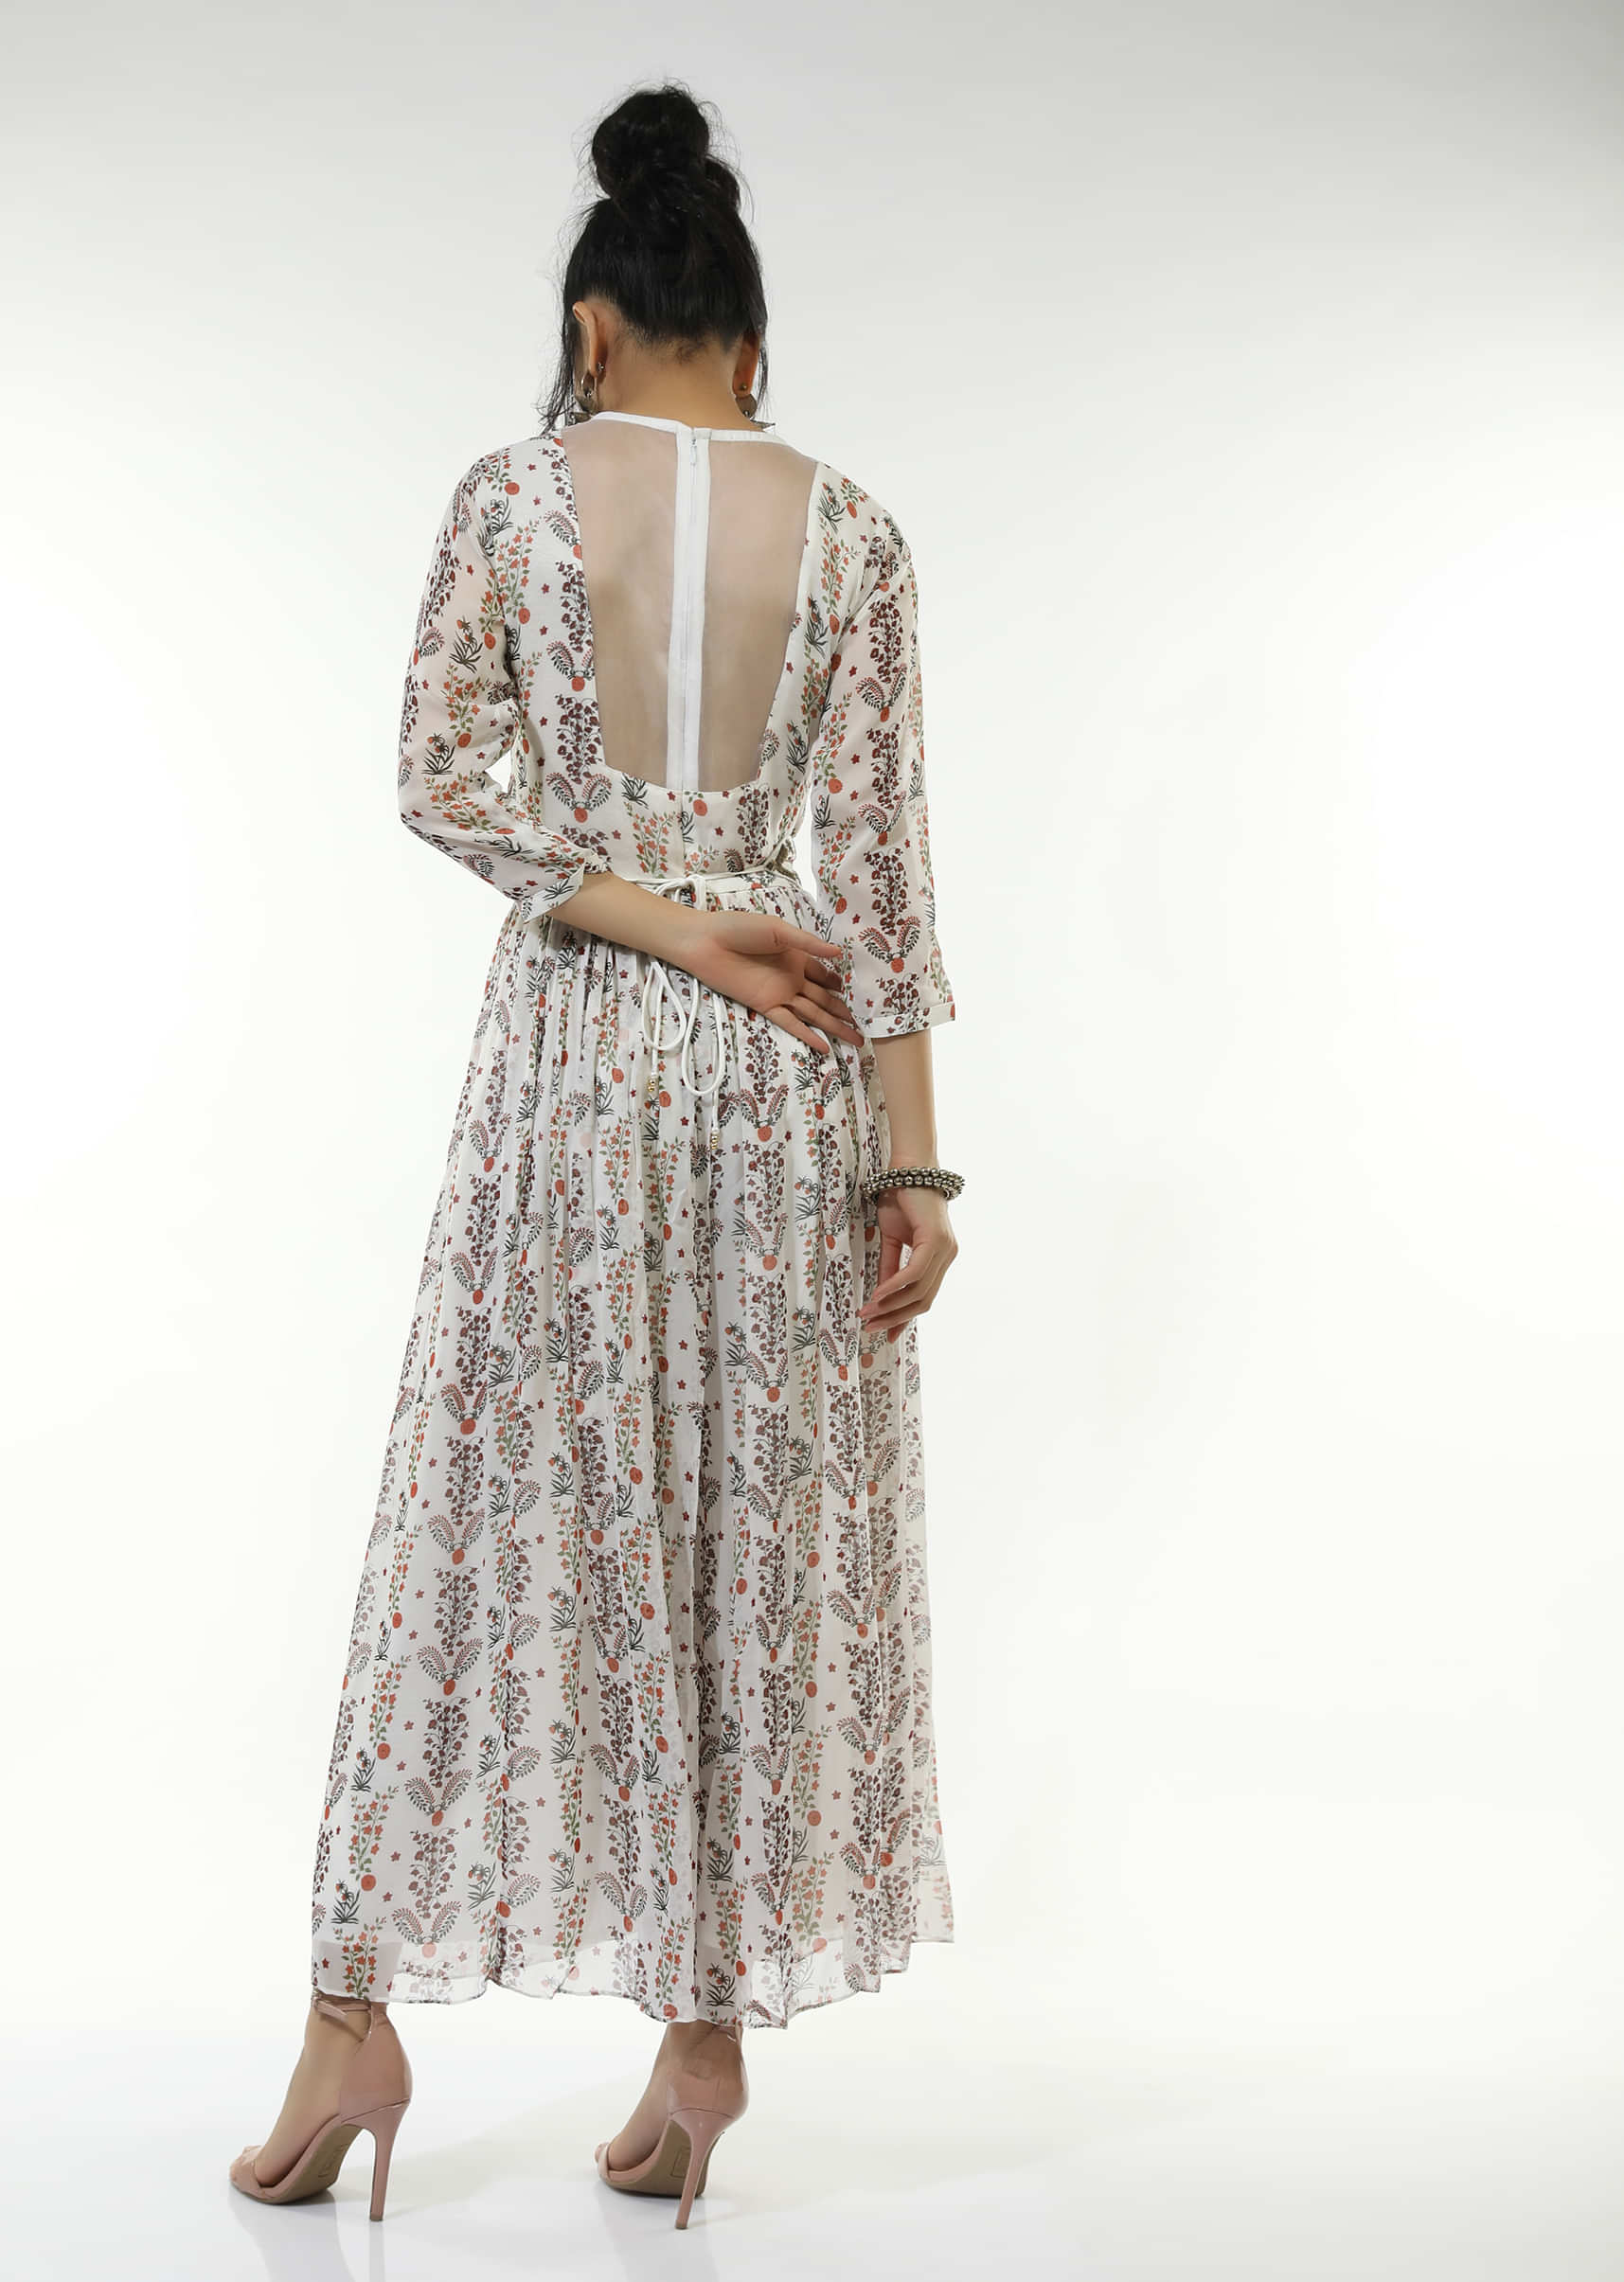 White Jumpsuit In Georgette Crepe With Floral Print And A Thread Embroidered Belt At The Waist  